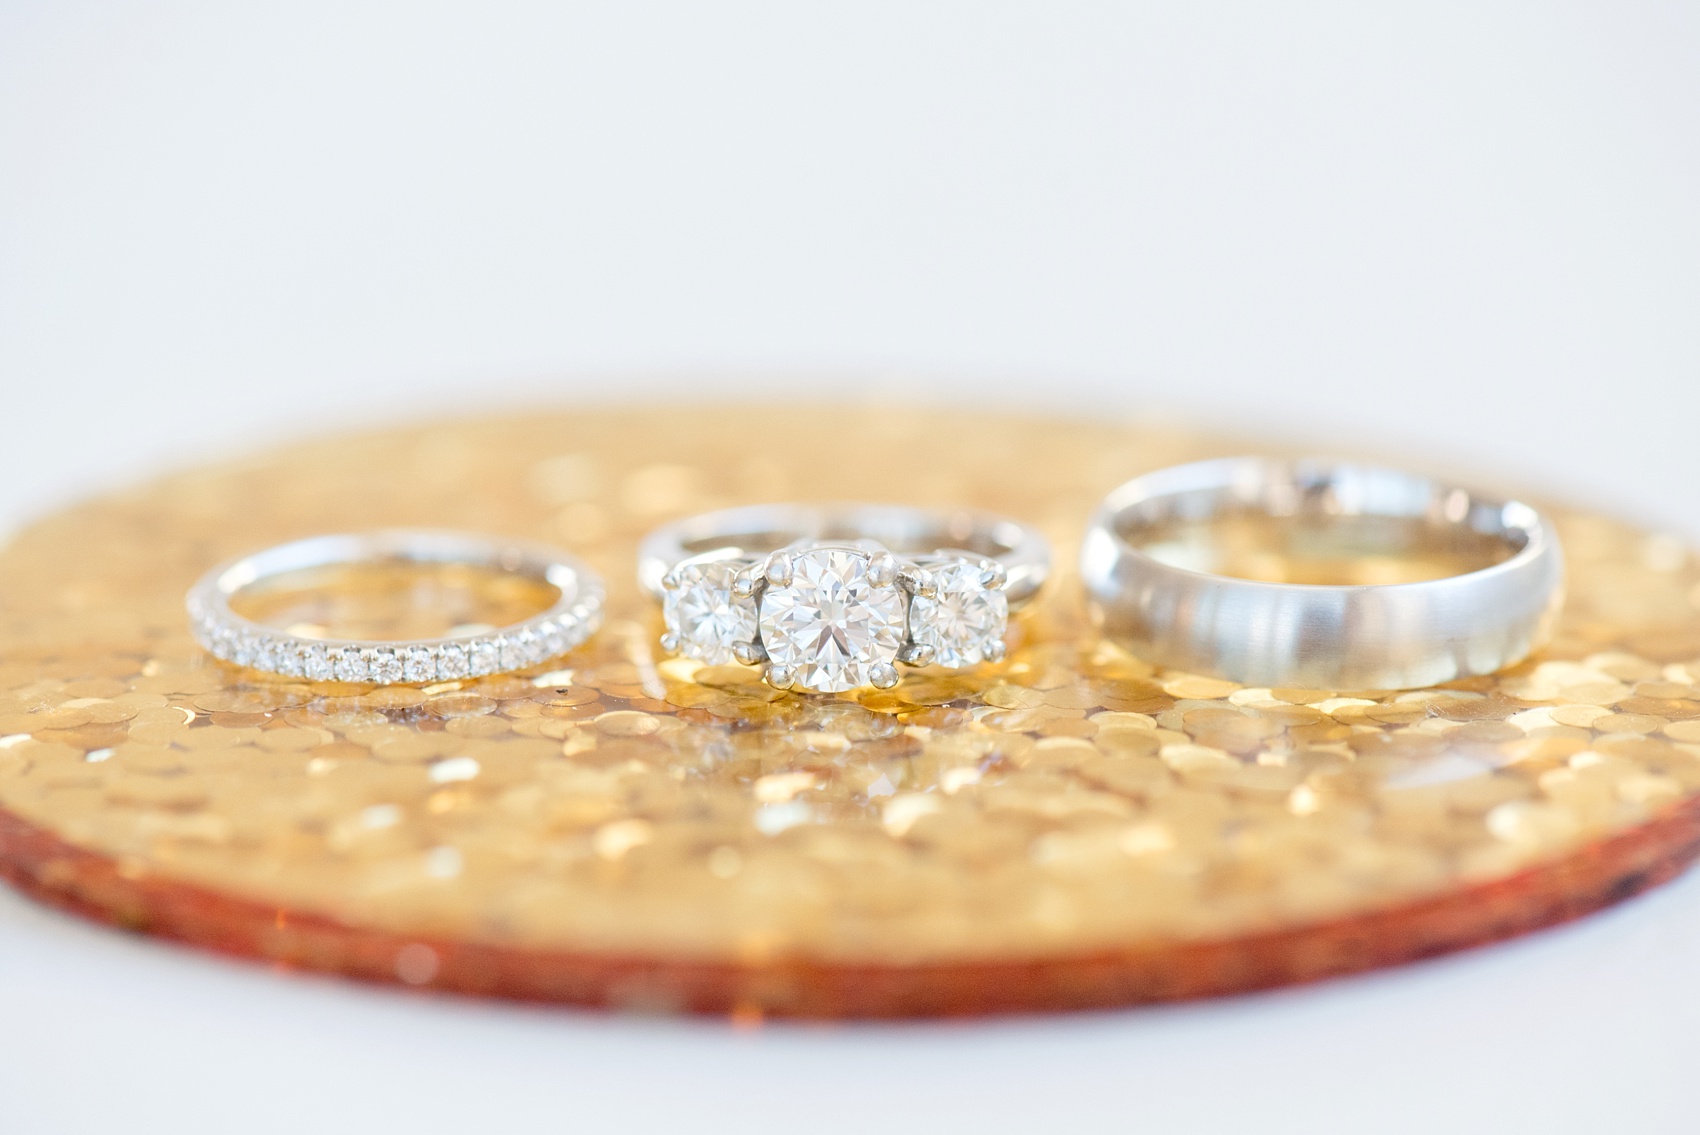 Mikkel Paige Photography photos from a wedding at The Glass Box and Stockroom at 230 in Raleigh. A detail image of the bride's three stone engagement ring.